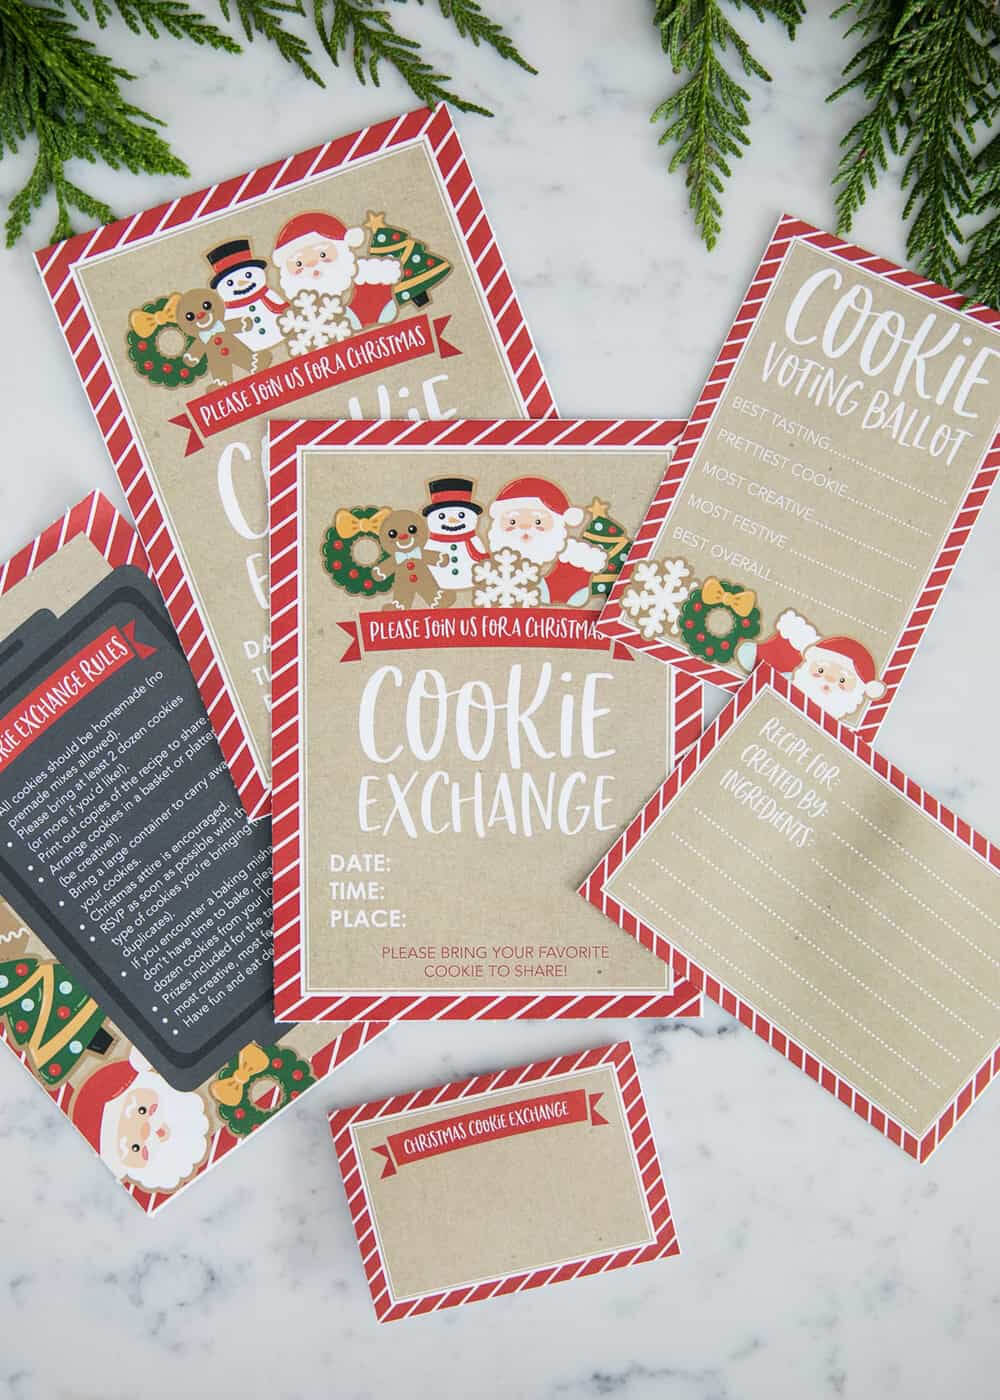 How To Host A Cookie Exchange (W/ Free Printables!) - I Intended For Cookie Exchange Recipe Card Template